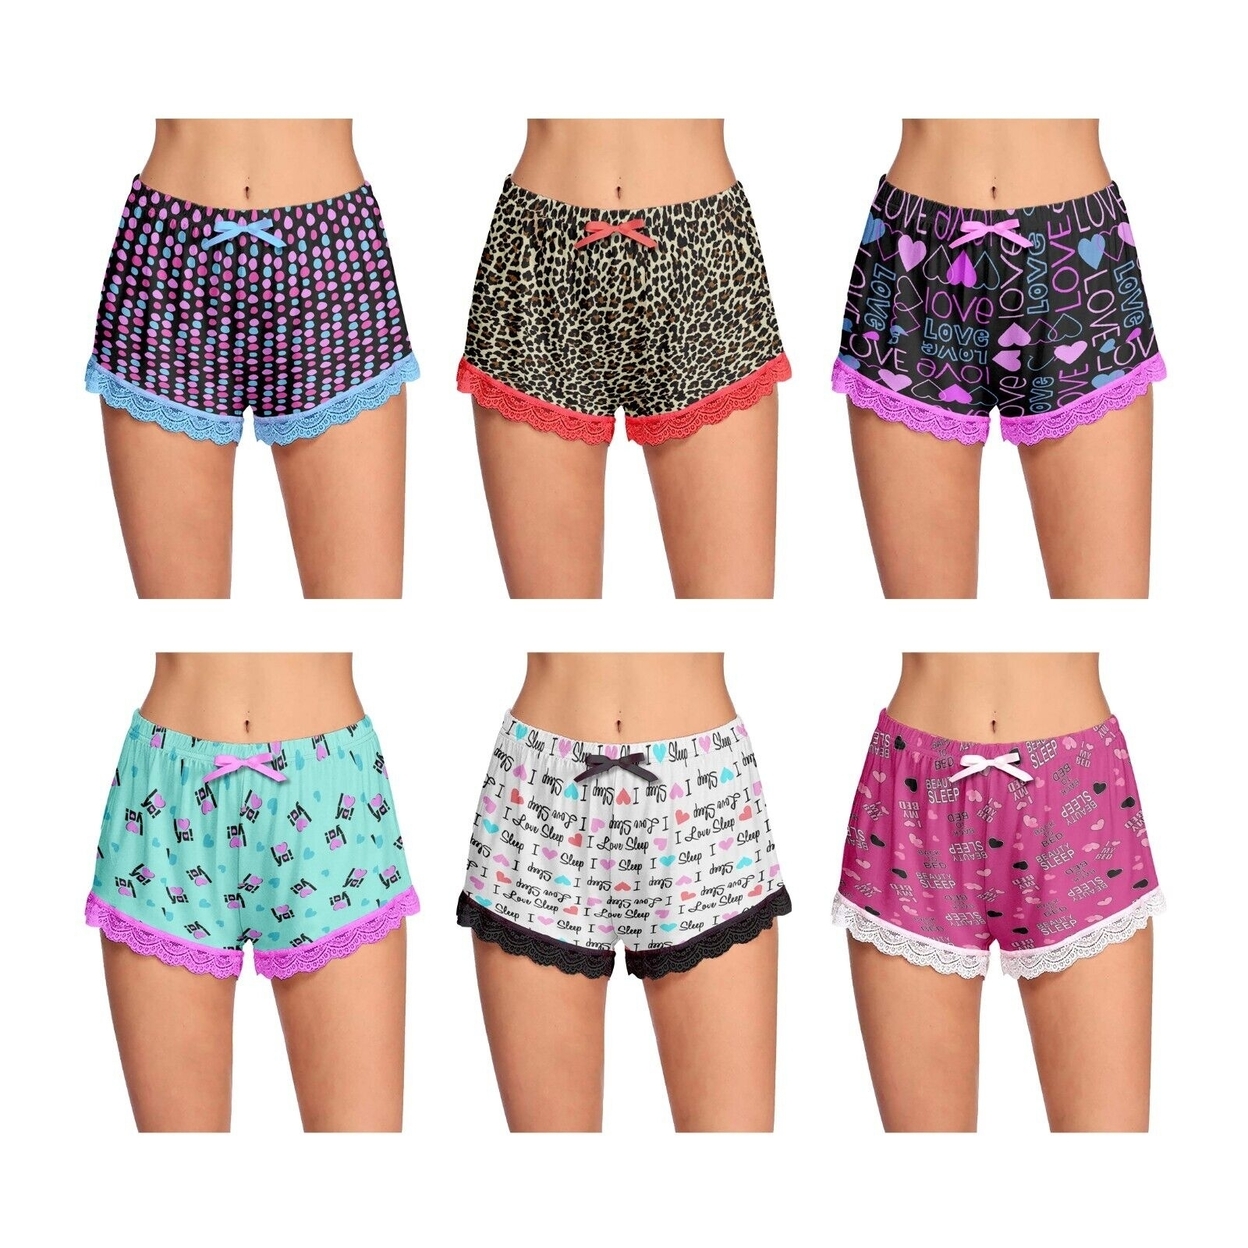 Multi-Pack: Women's Ultra-Soft Cozy Fun Printed Lace Trim Pajama Lounge Shorts - 3-pack, Small, Love